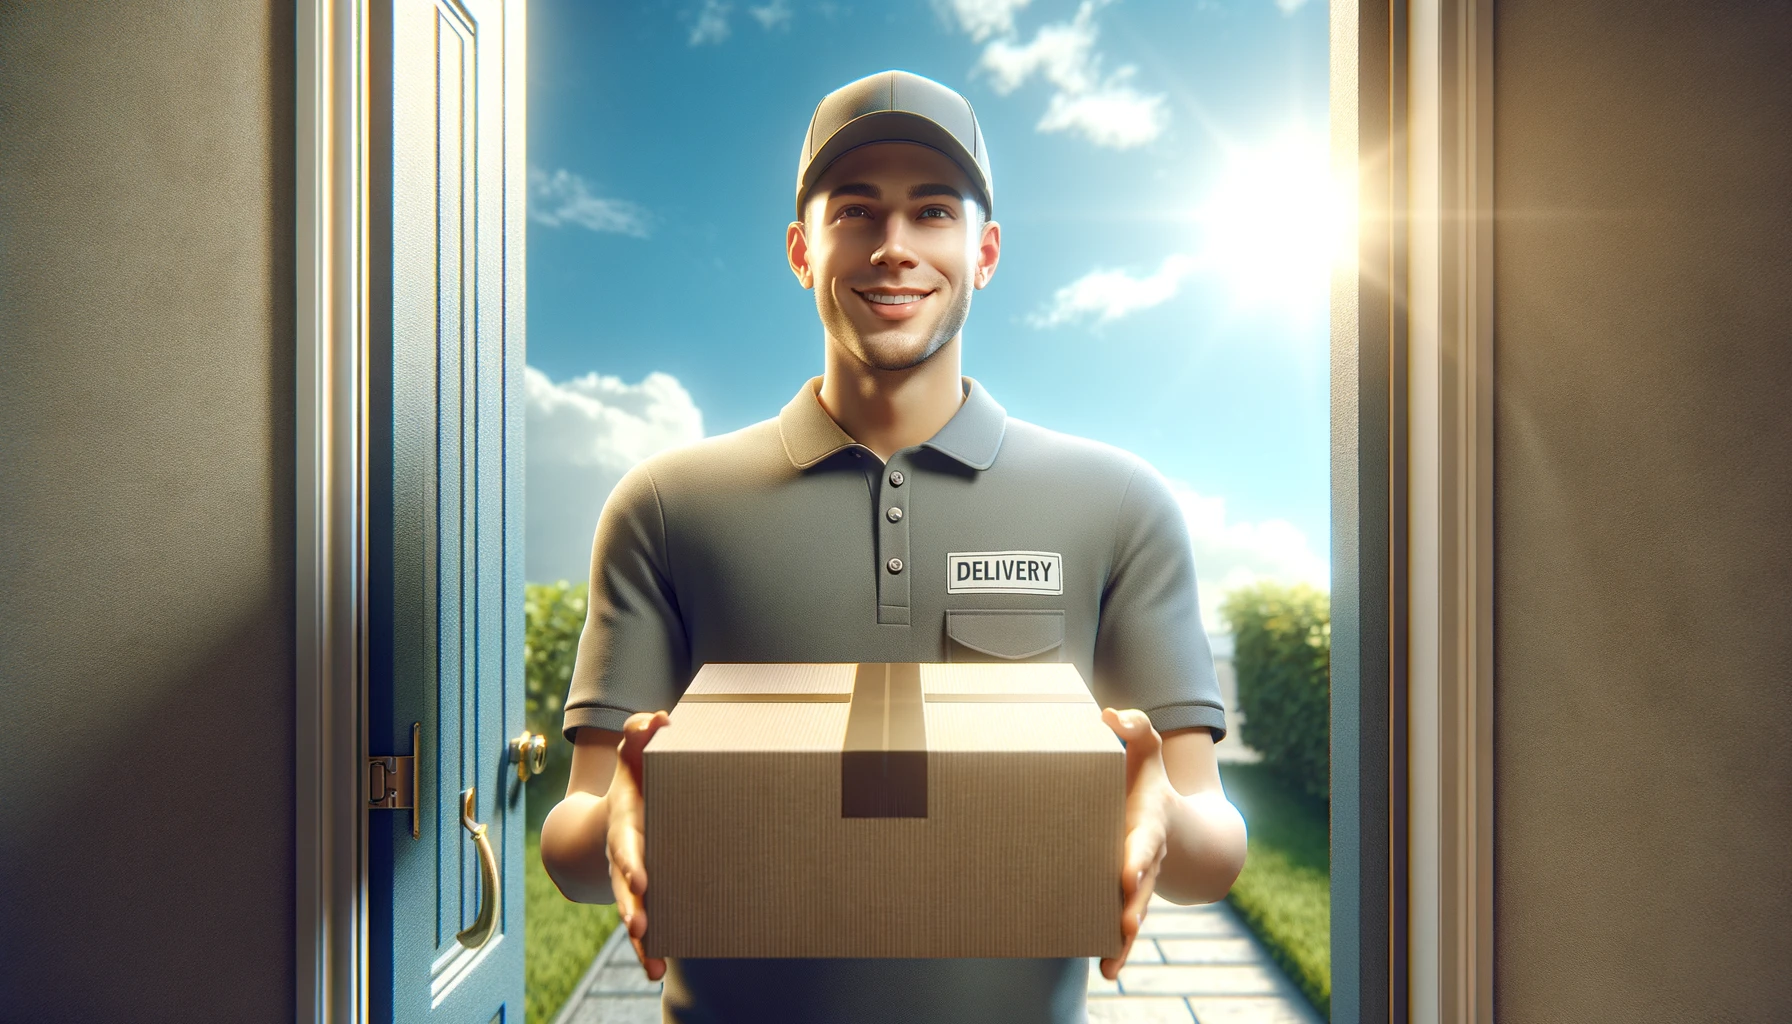 DALL·E 2023-11-25 13.10.33 - Create an ultra-realistic image of a delivery person in a generic uniform, standing on a doorstep facing the viewer, as if delivering a package to the